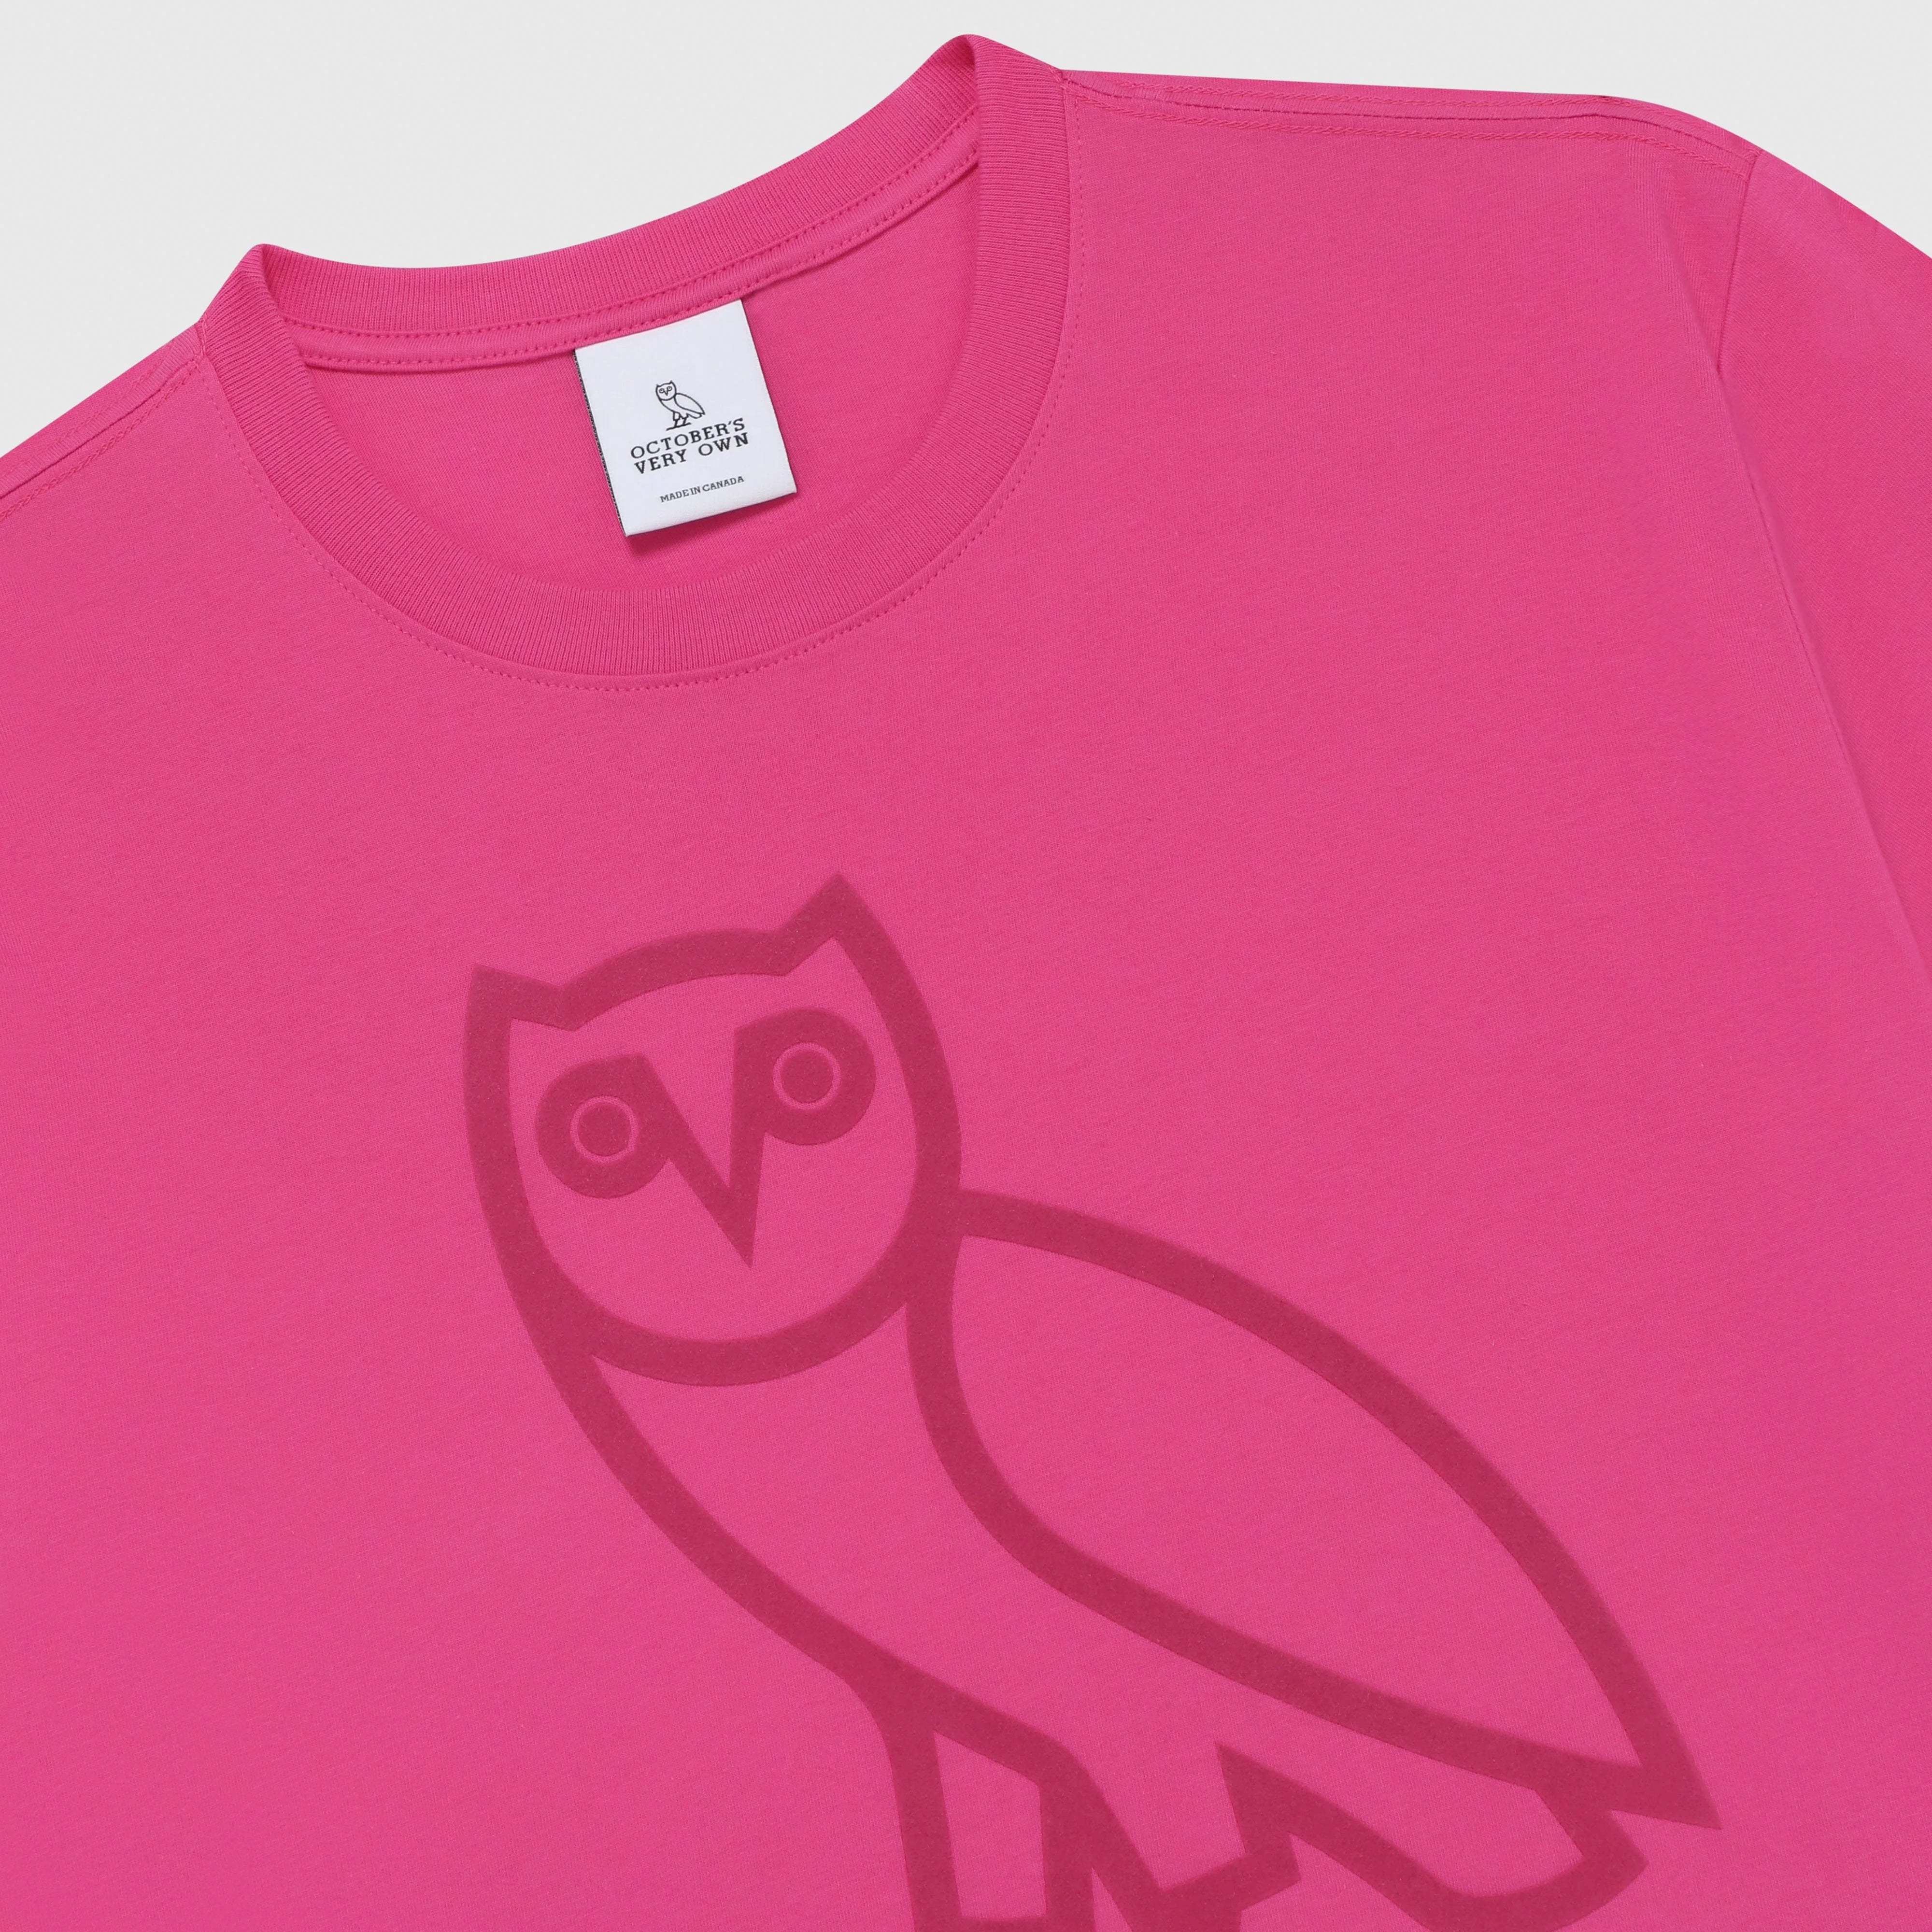 OVO Stained Glass Owl T-shirt Purple